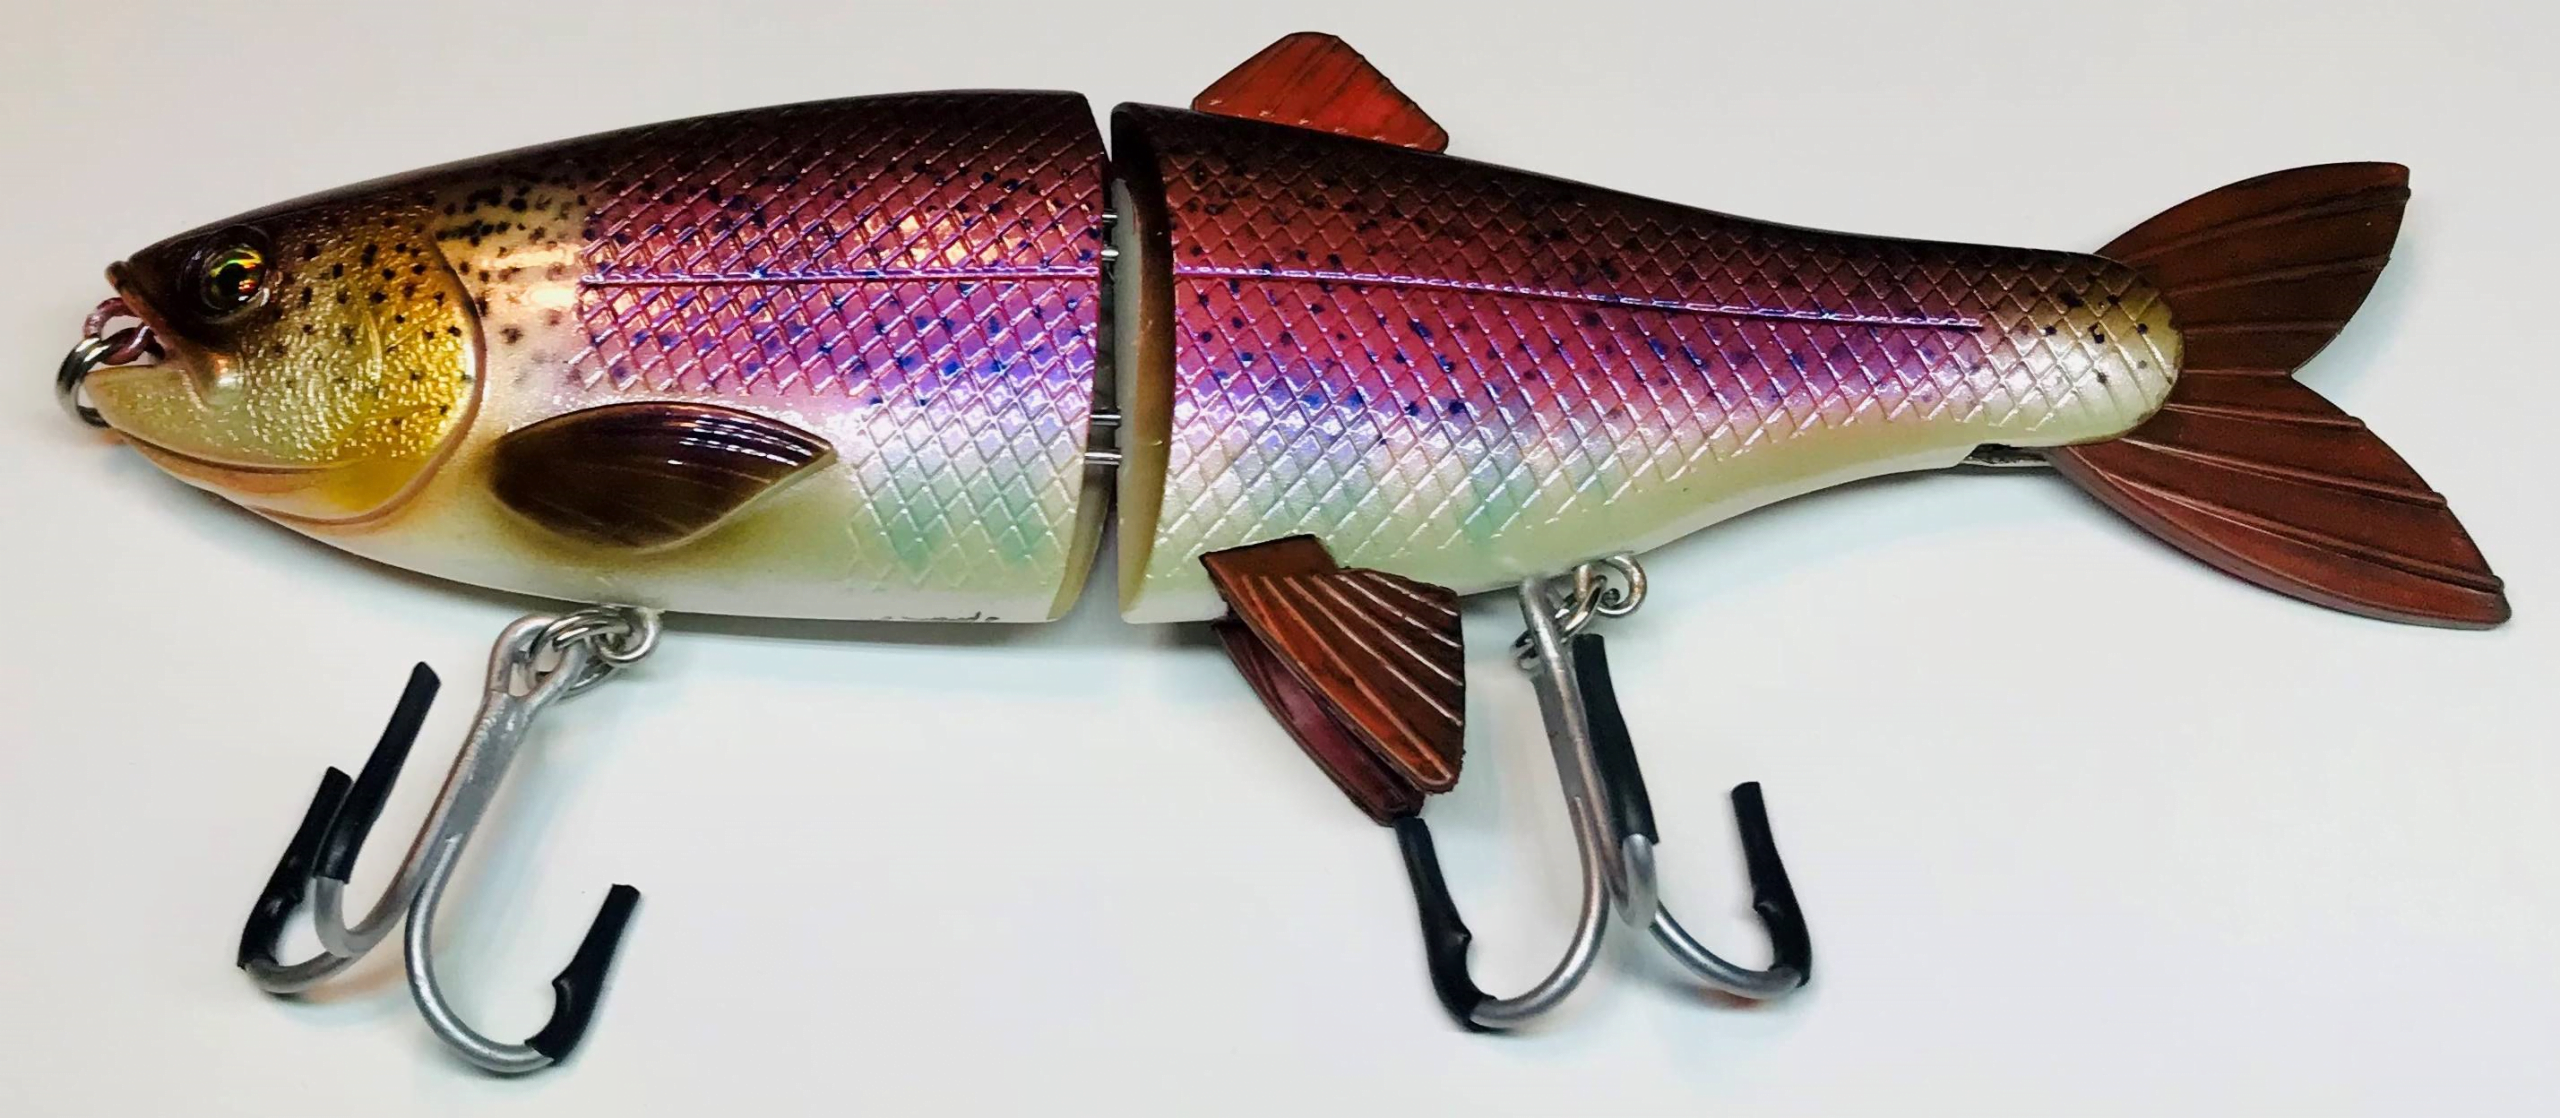 https://striperfun.com/wp-content/uploads/2022/02/rainbow_trout_lure_handcrafted.png